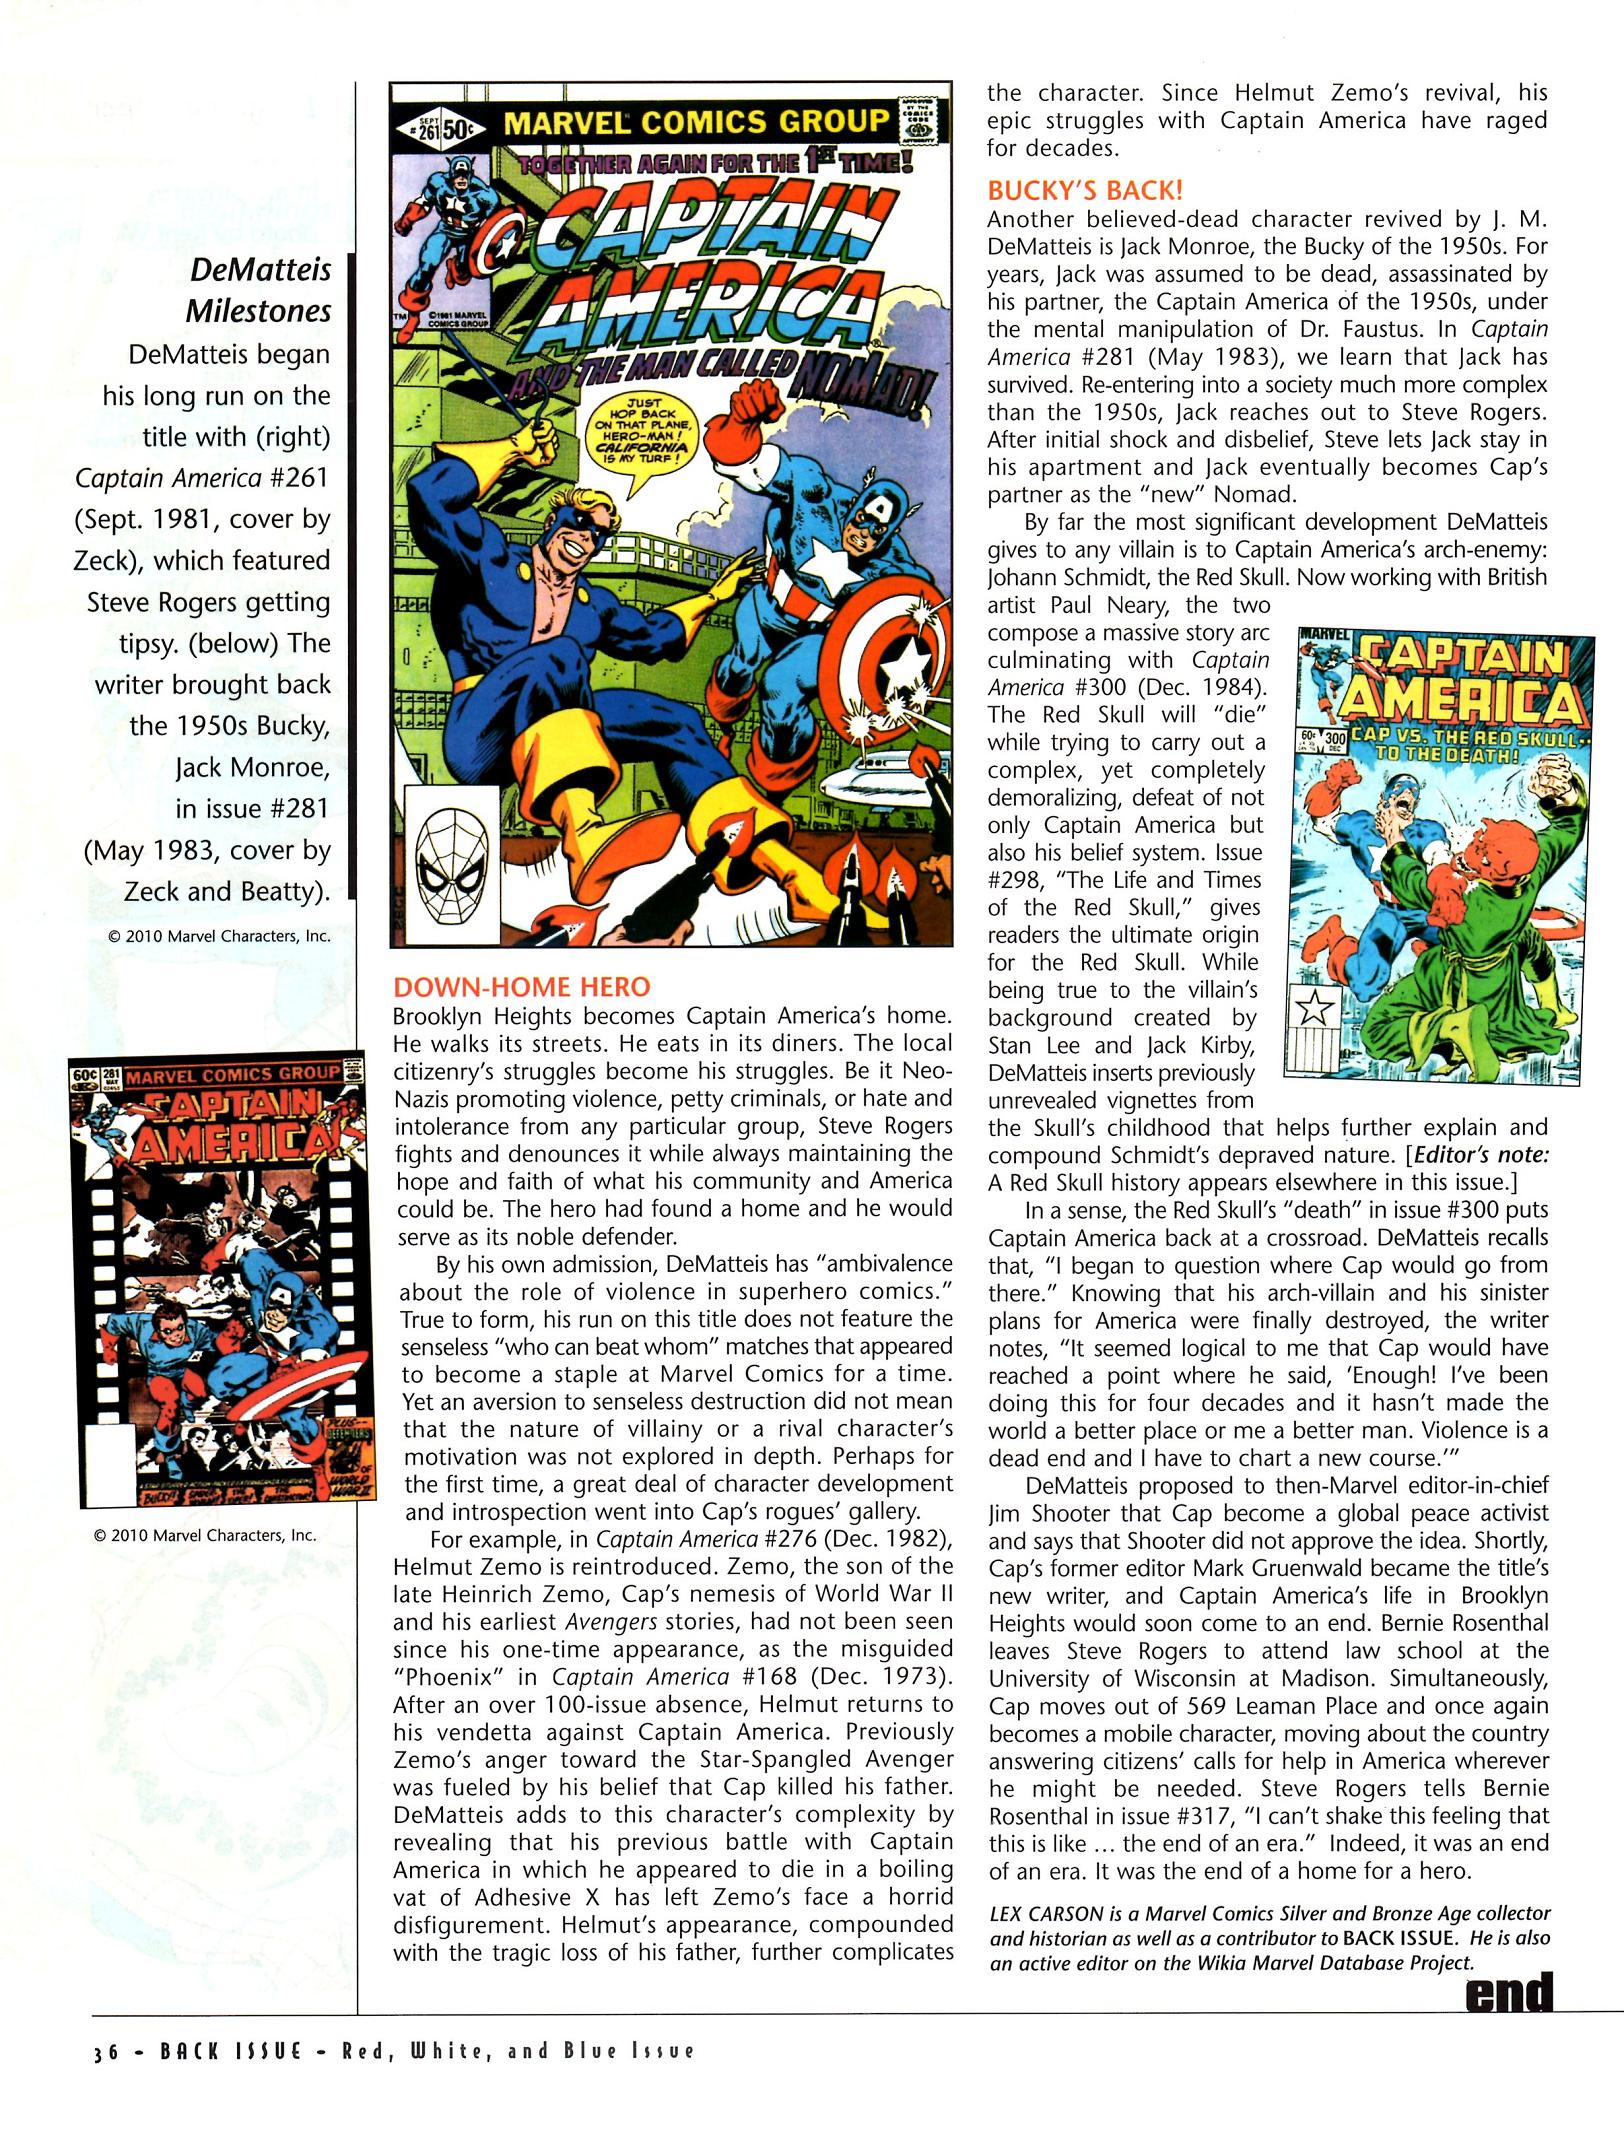 Read online Back Issue comic -  Issue #41 - 38